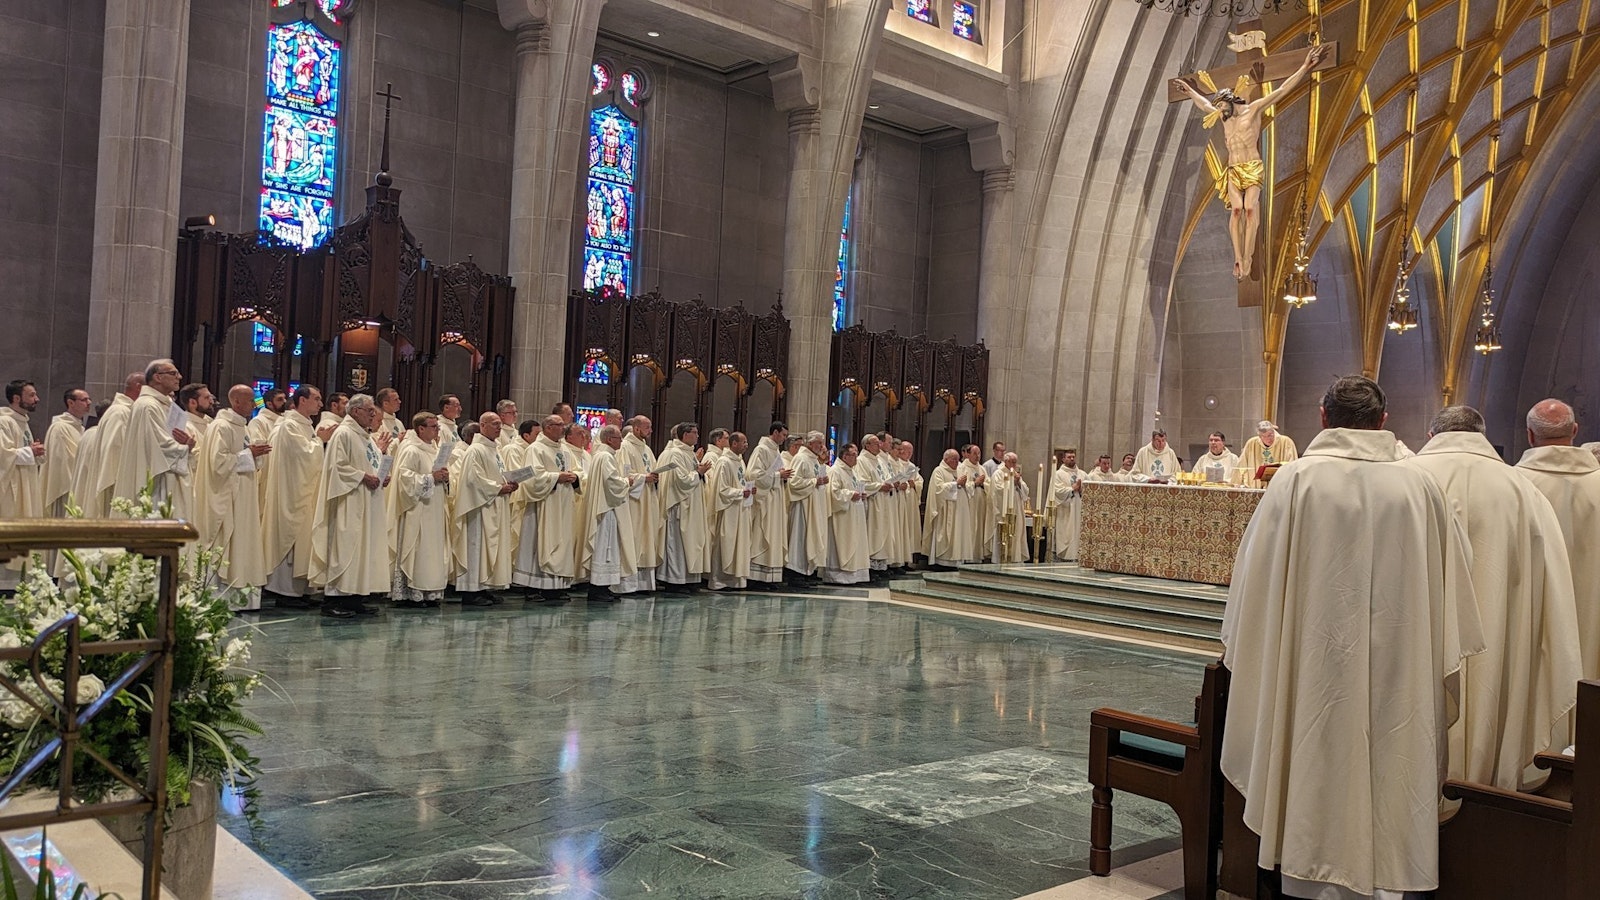 Bishop Gerard W. Battersby, right, celebrates his first Mass with his new diocese surrounded by priests of the Diocese of La Crosse, Wis., on May 20 at the Cathedral of St. Joseph the Workman in La Crosse. (Courtesy of the Diocese of La Crosse)